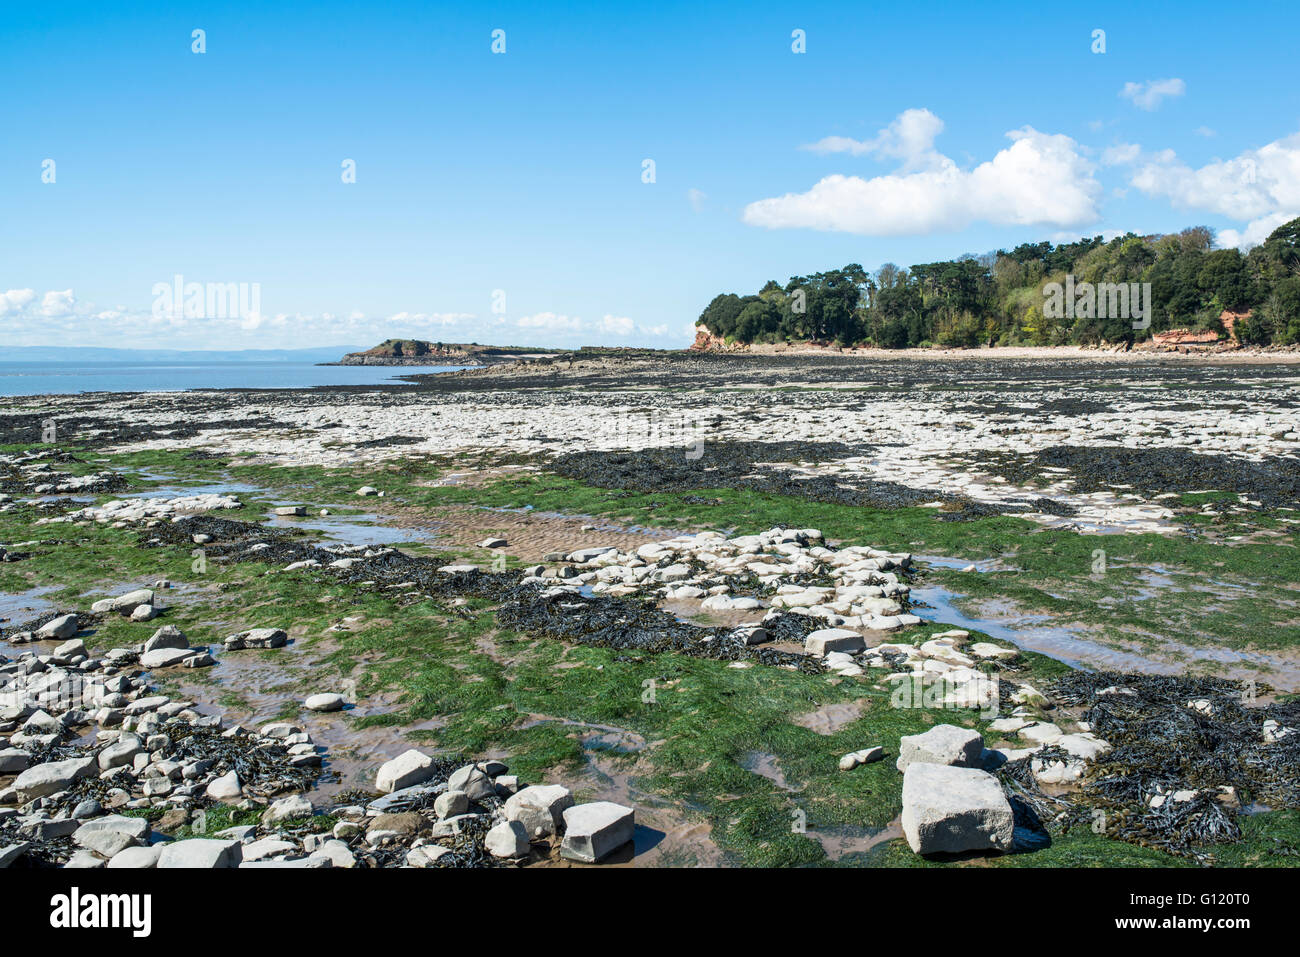 Seaweed on a beach, below cliffs, with a tidal island in the bay. Stock Photo